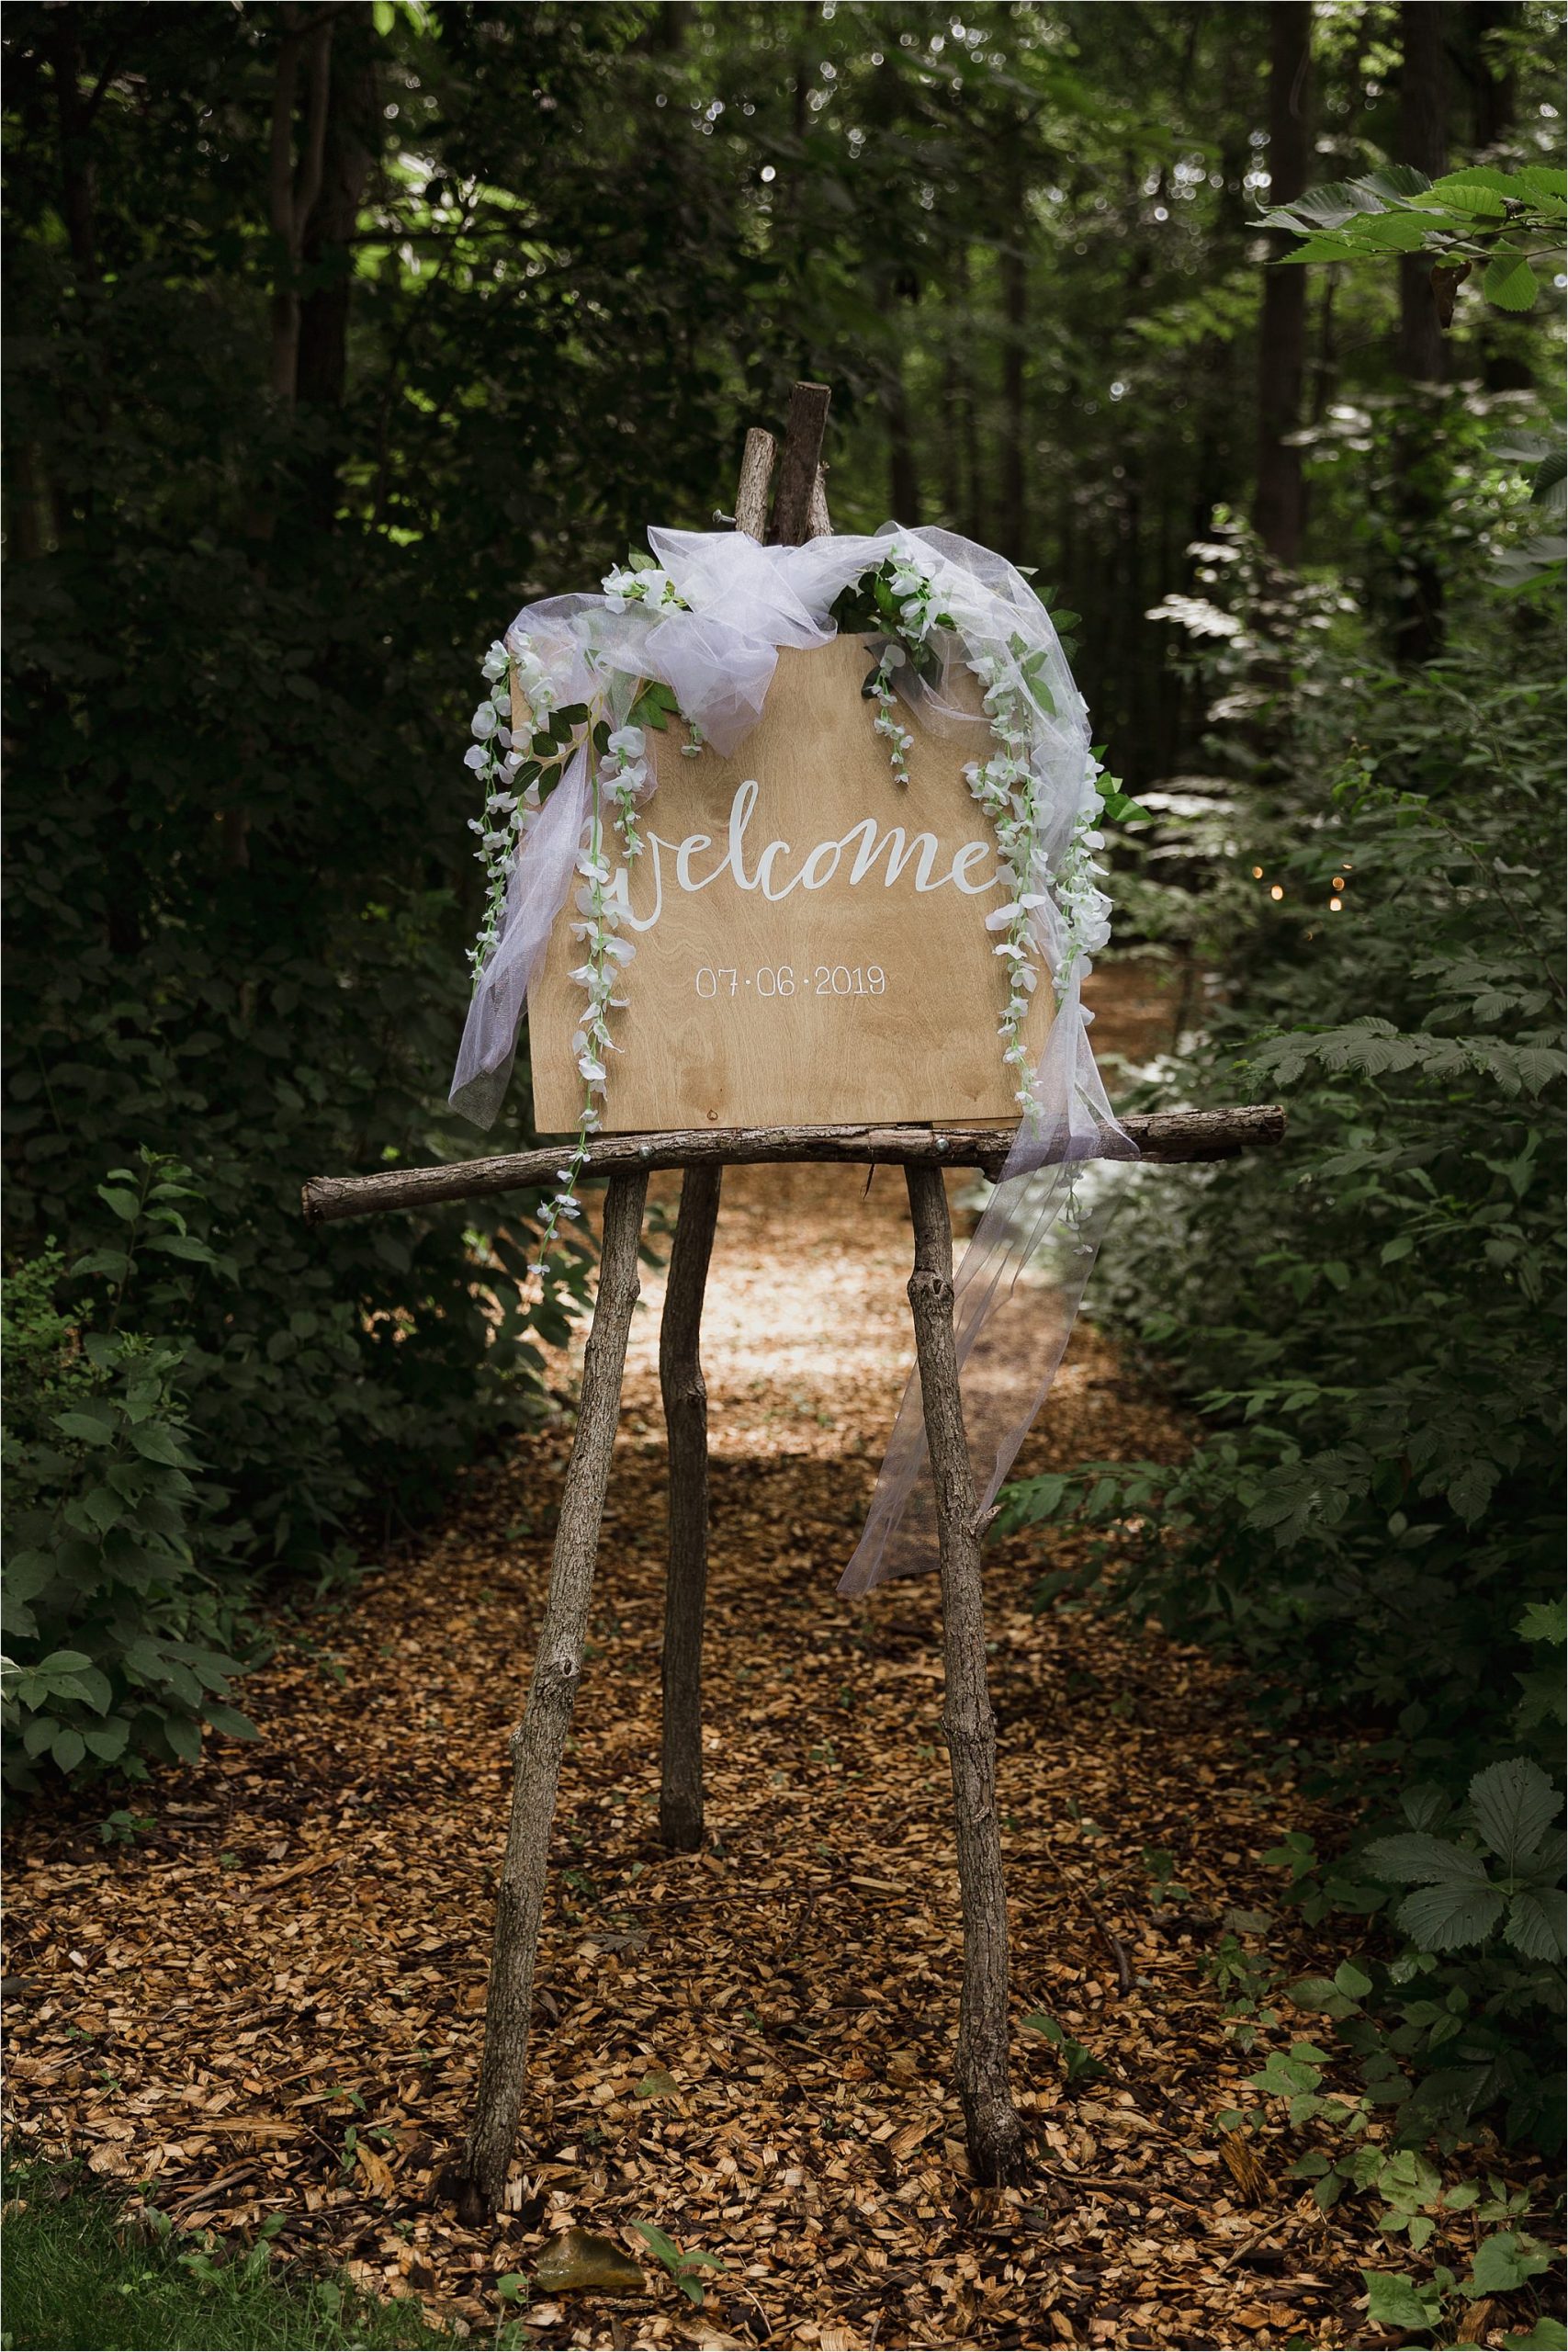 The Clearing wedding venue welcome ceremony sign green floral and tulle